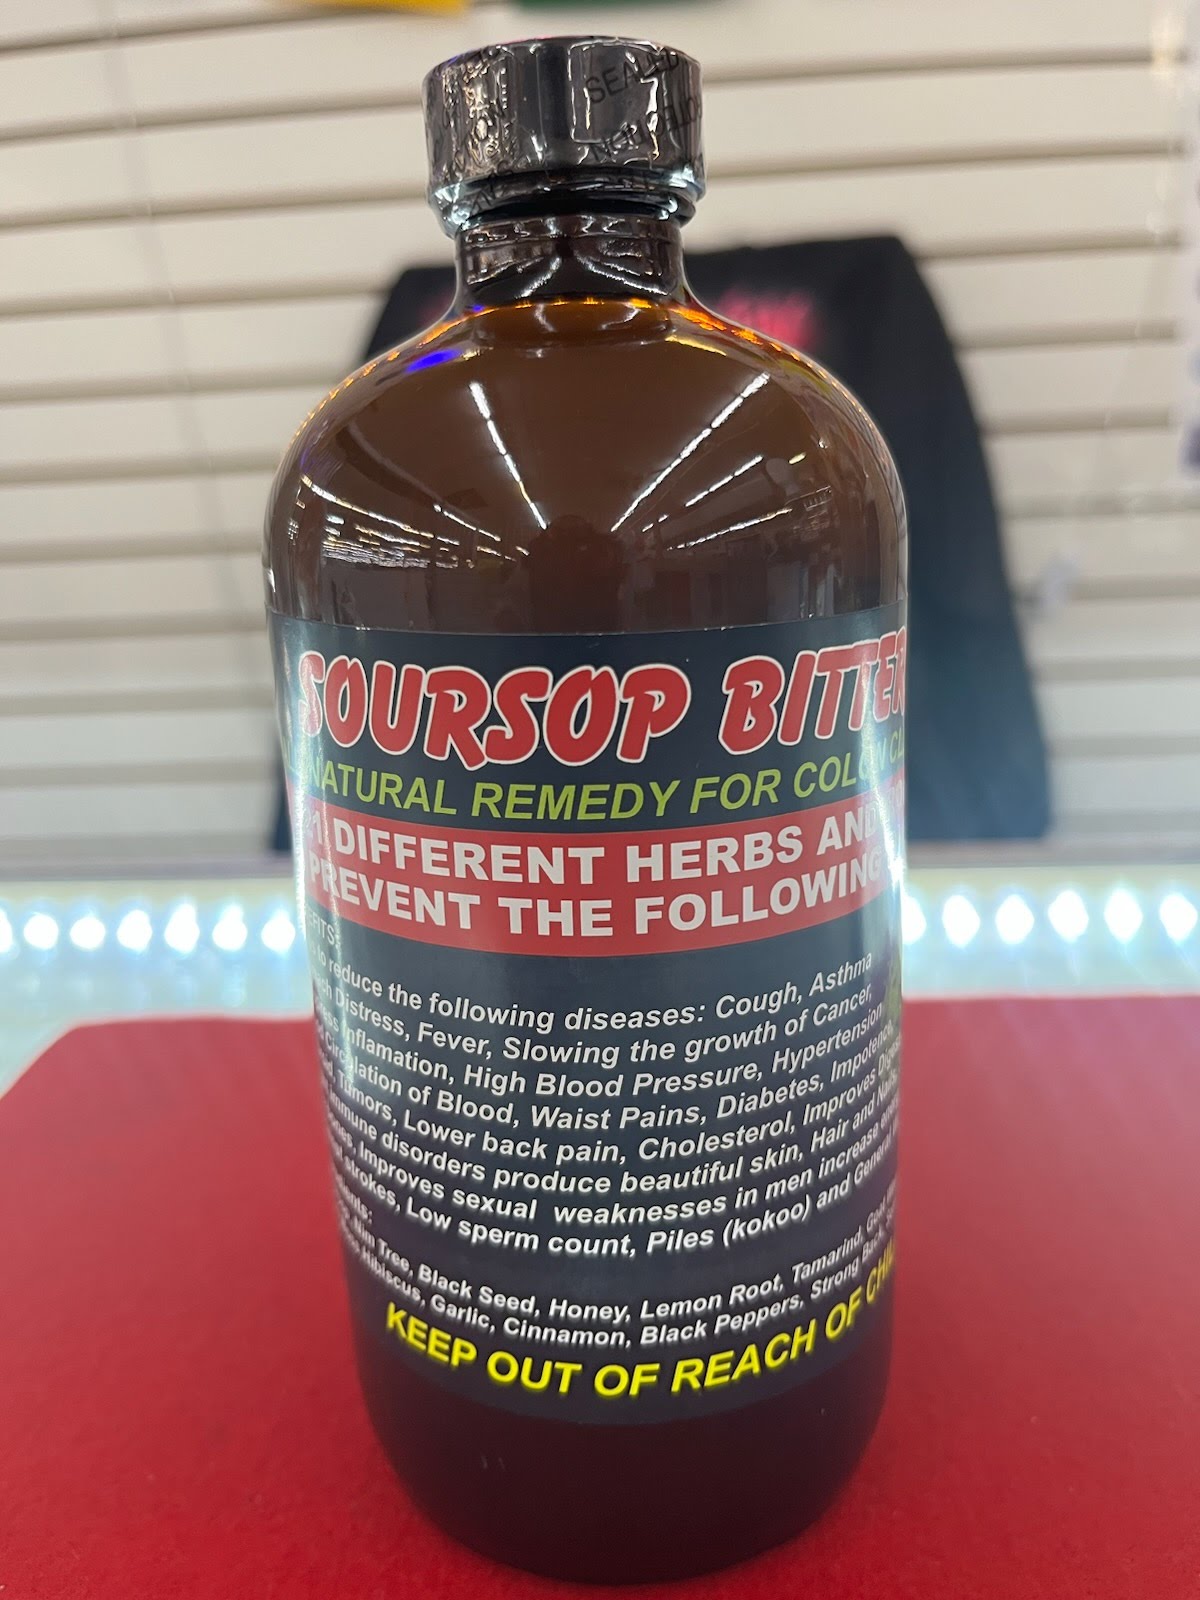 A bottle of bursop syrup sitting on top of a table.